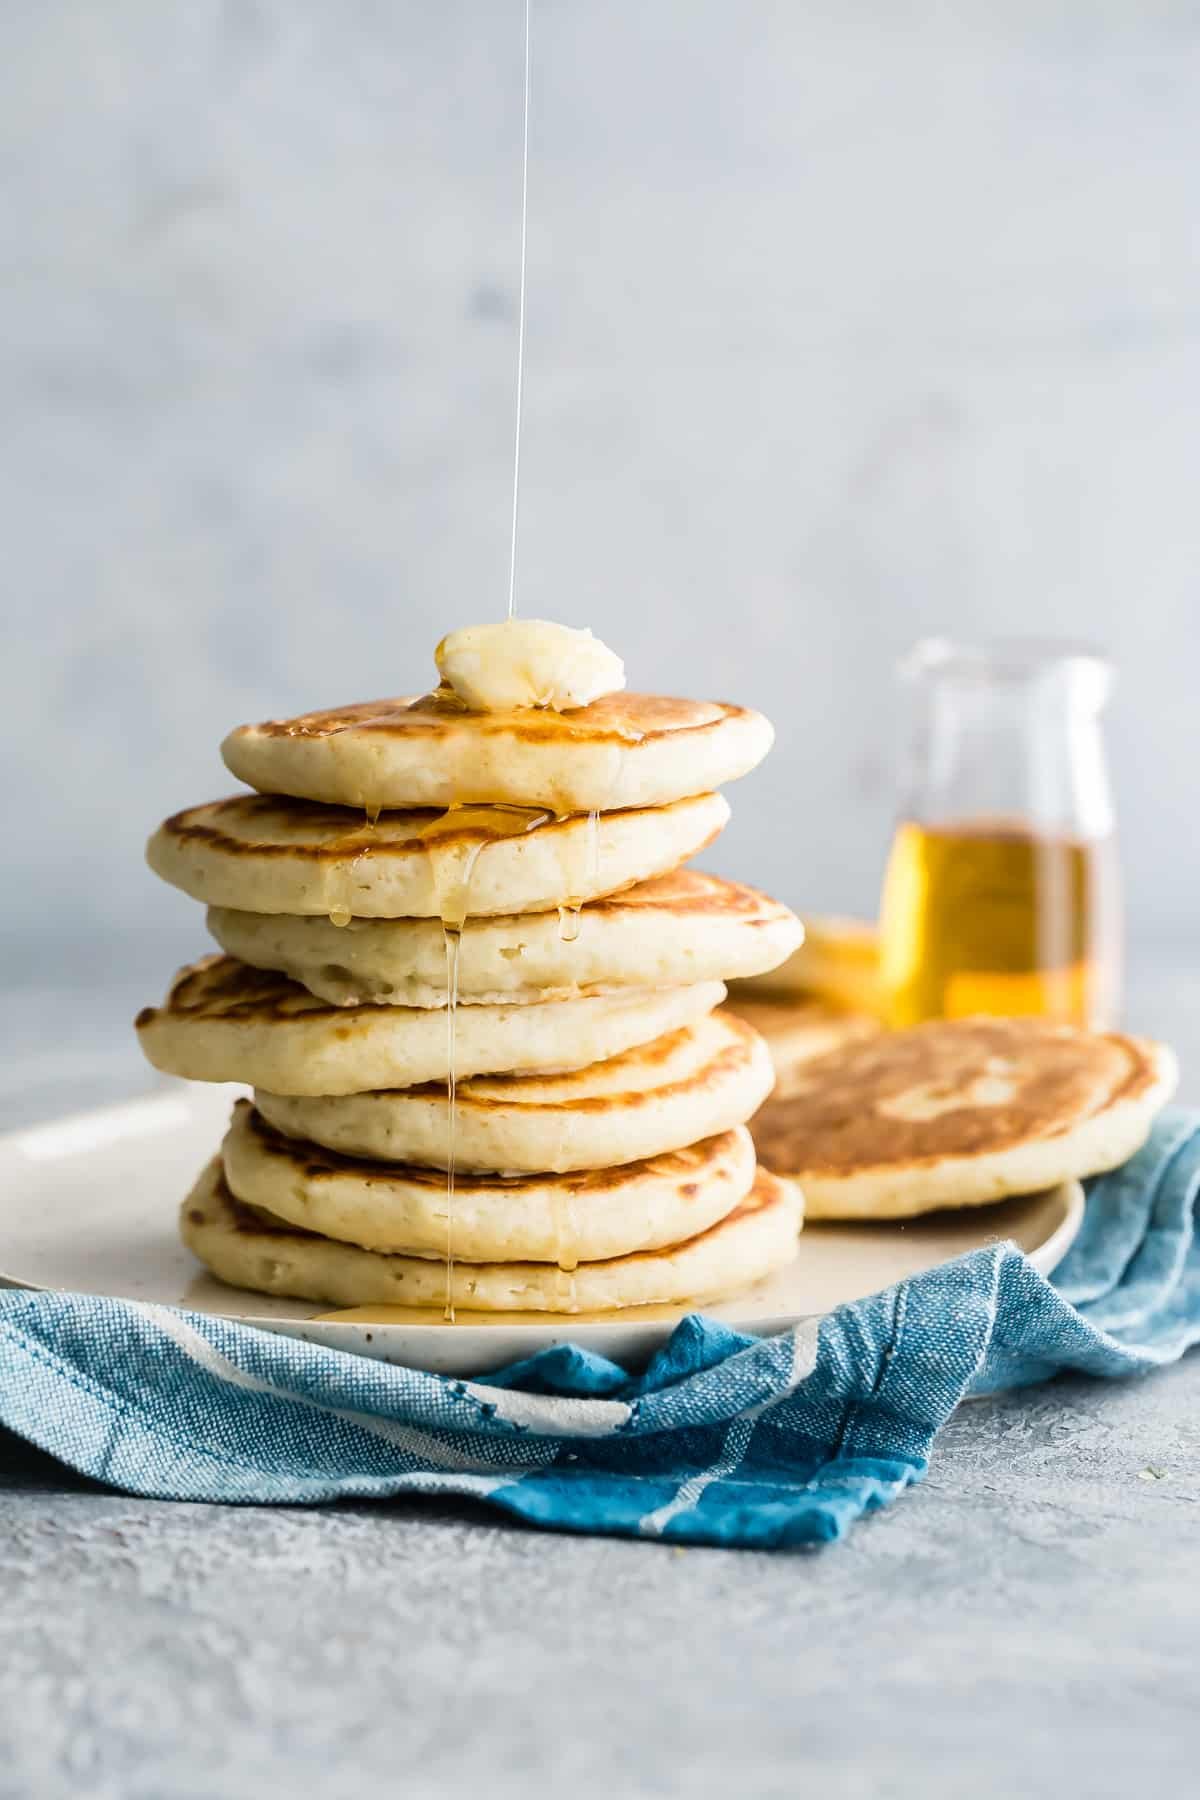 A stack of homemade pancakes on a plate.